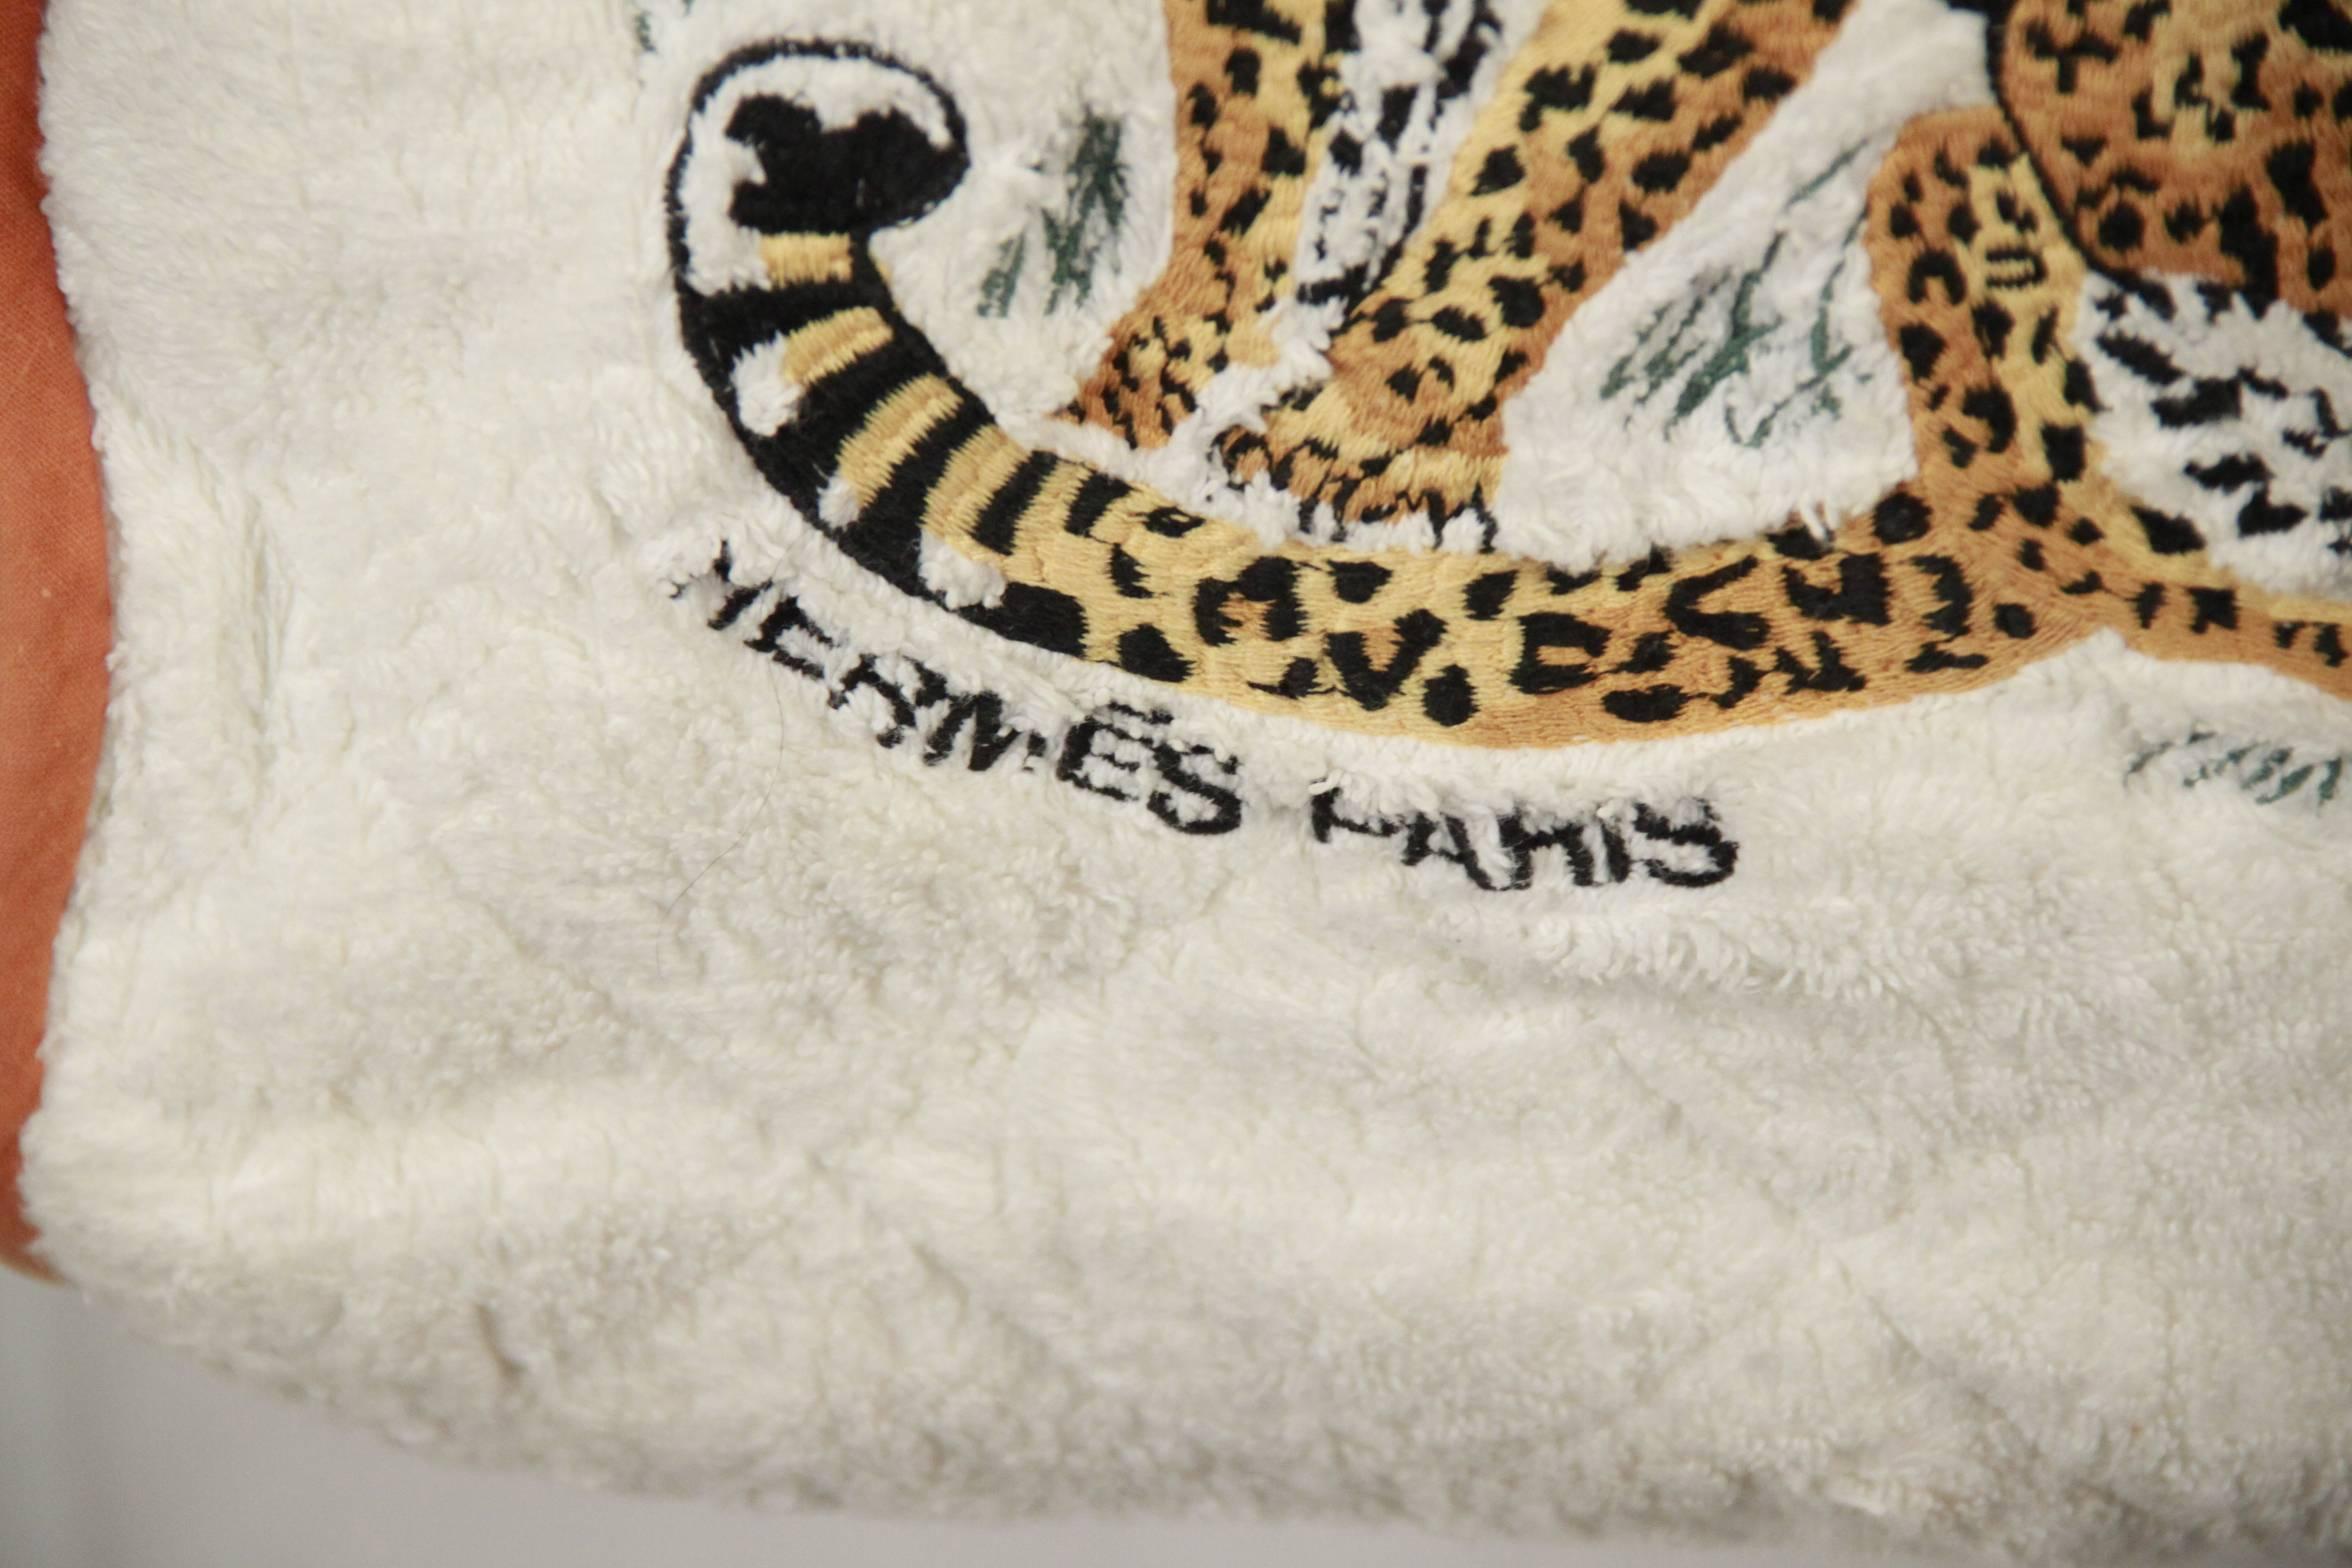 - HERMES beach bag crafted in white quilted terry cloth
- Embroidered tiger design on the front
- Piped yellow edges
- Open top
- cotton lined interior that holds a bottom zippered storage compartment
- This piece is in excellent condition. No